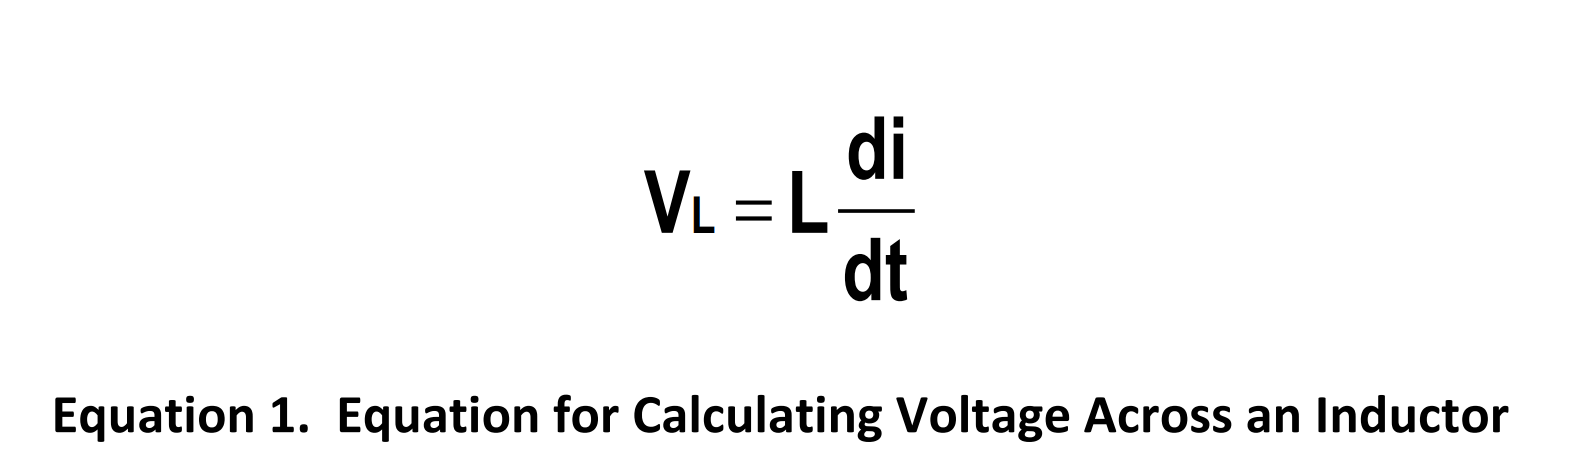 Equation for Finding the Voltage Across an Inductor